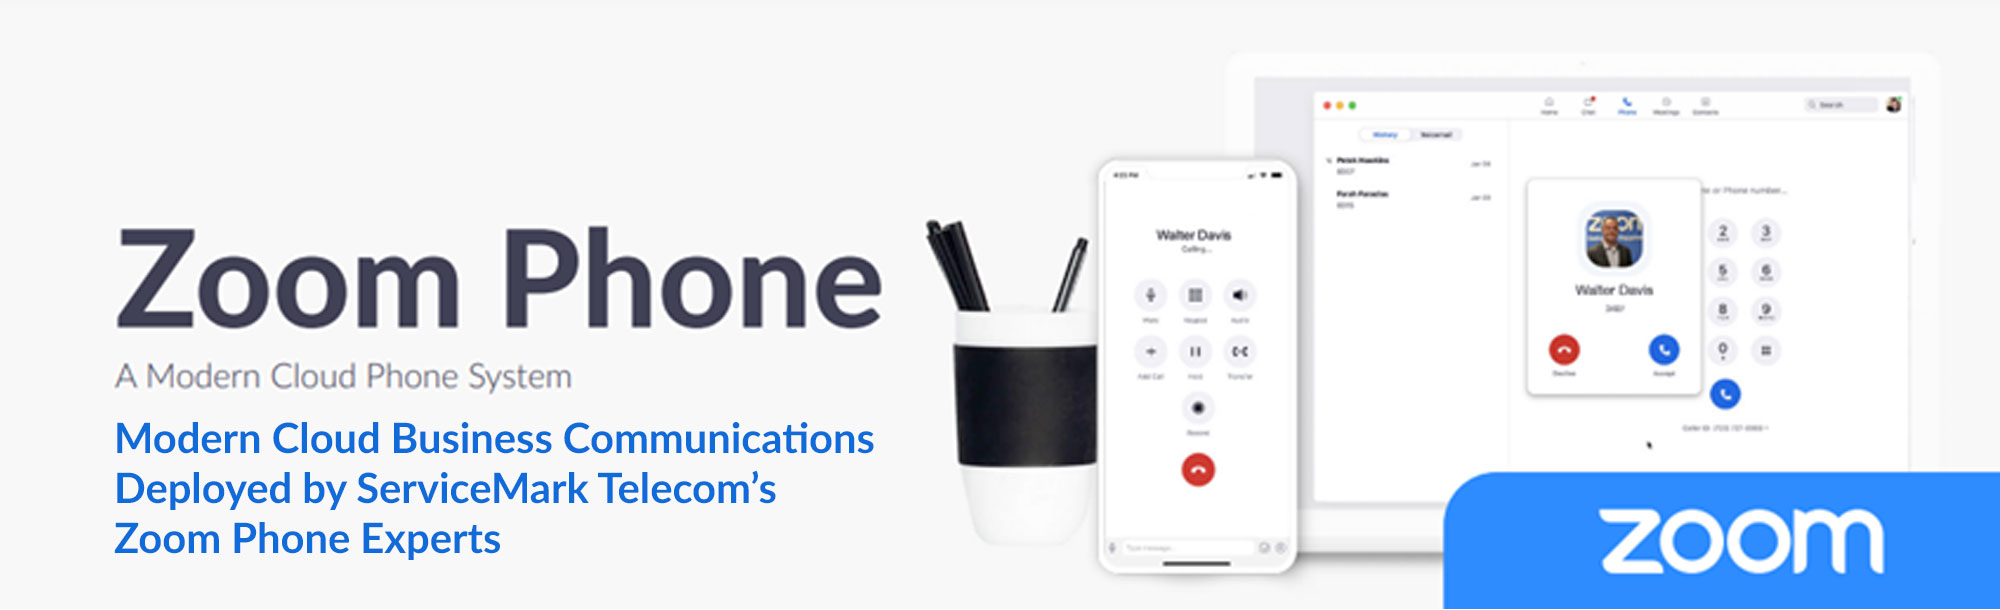 zoom phone cloud business communications deployed by servicemark telecom